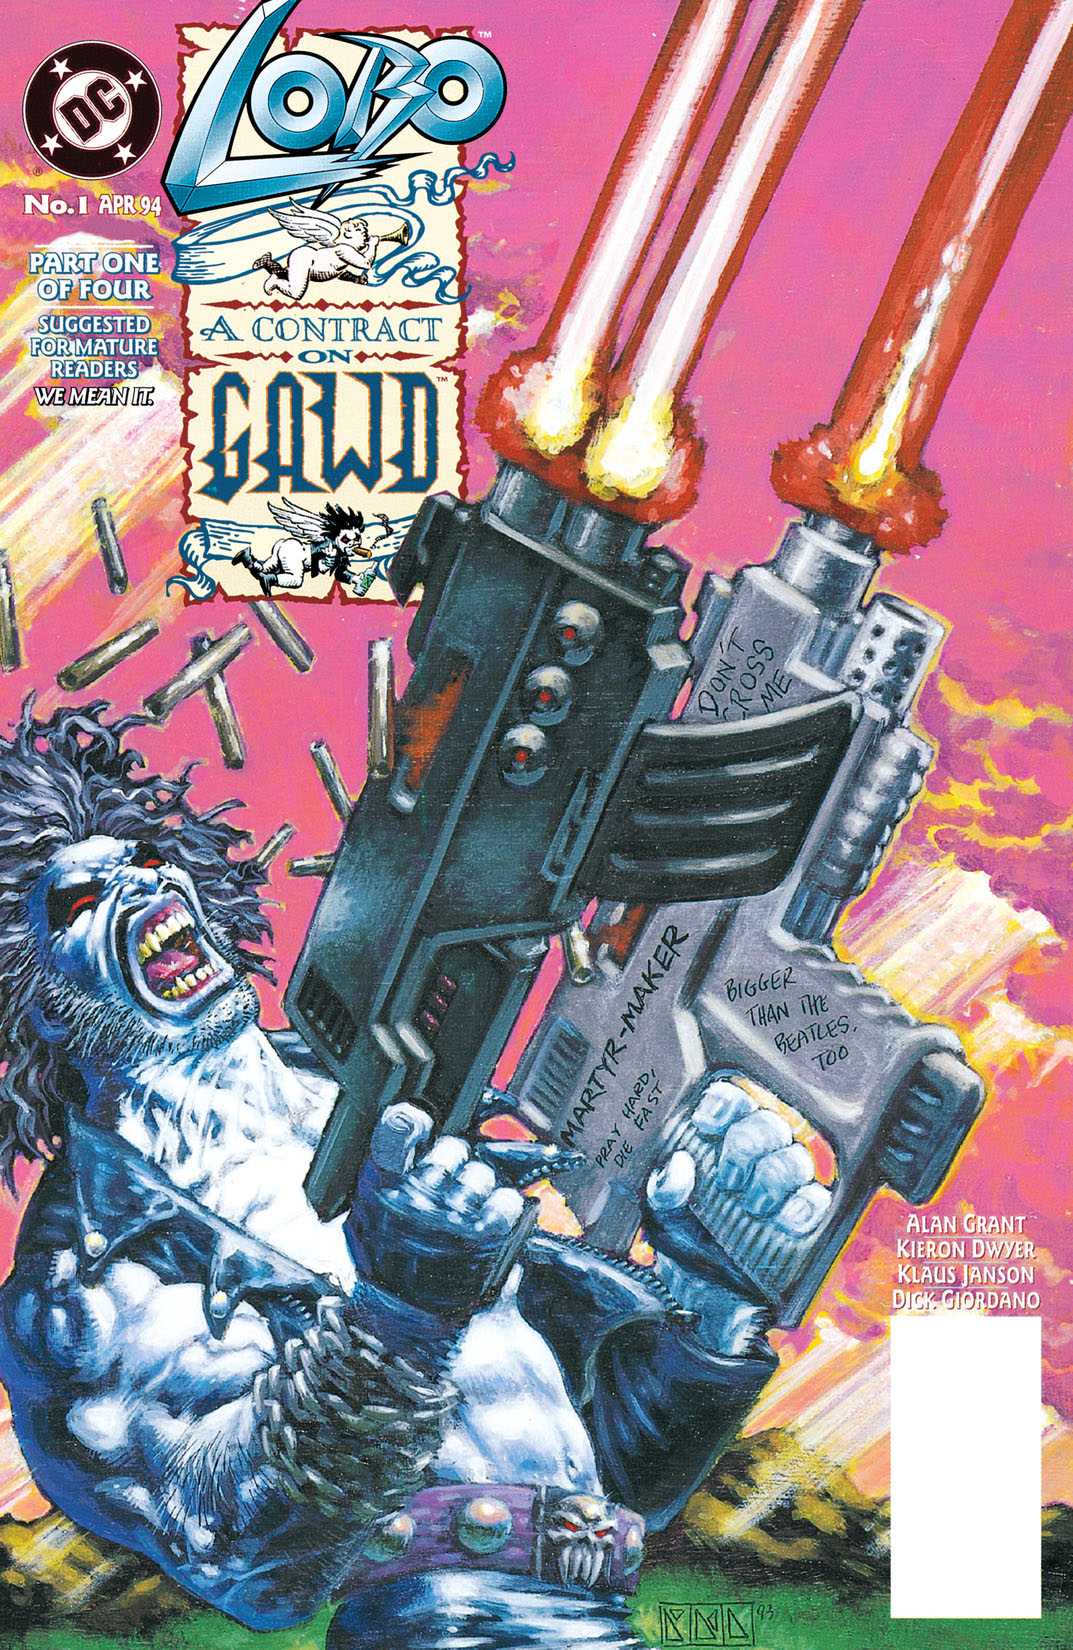 Lobo: A Contract on Gawd #1 preview images